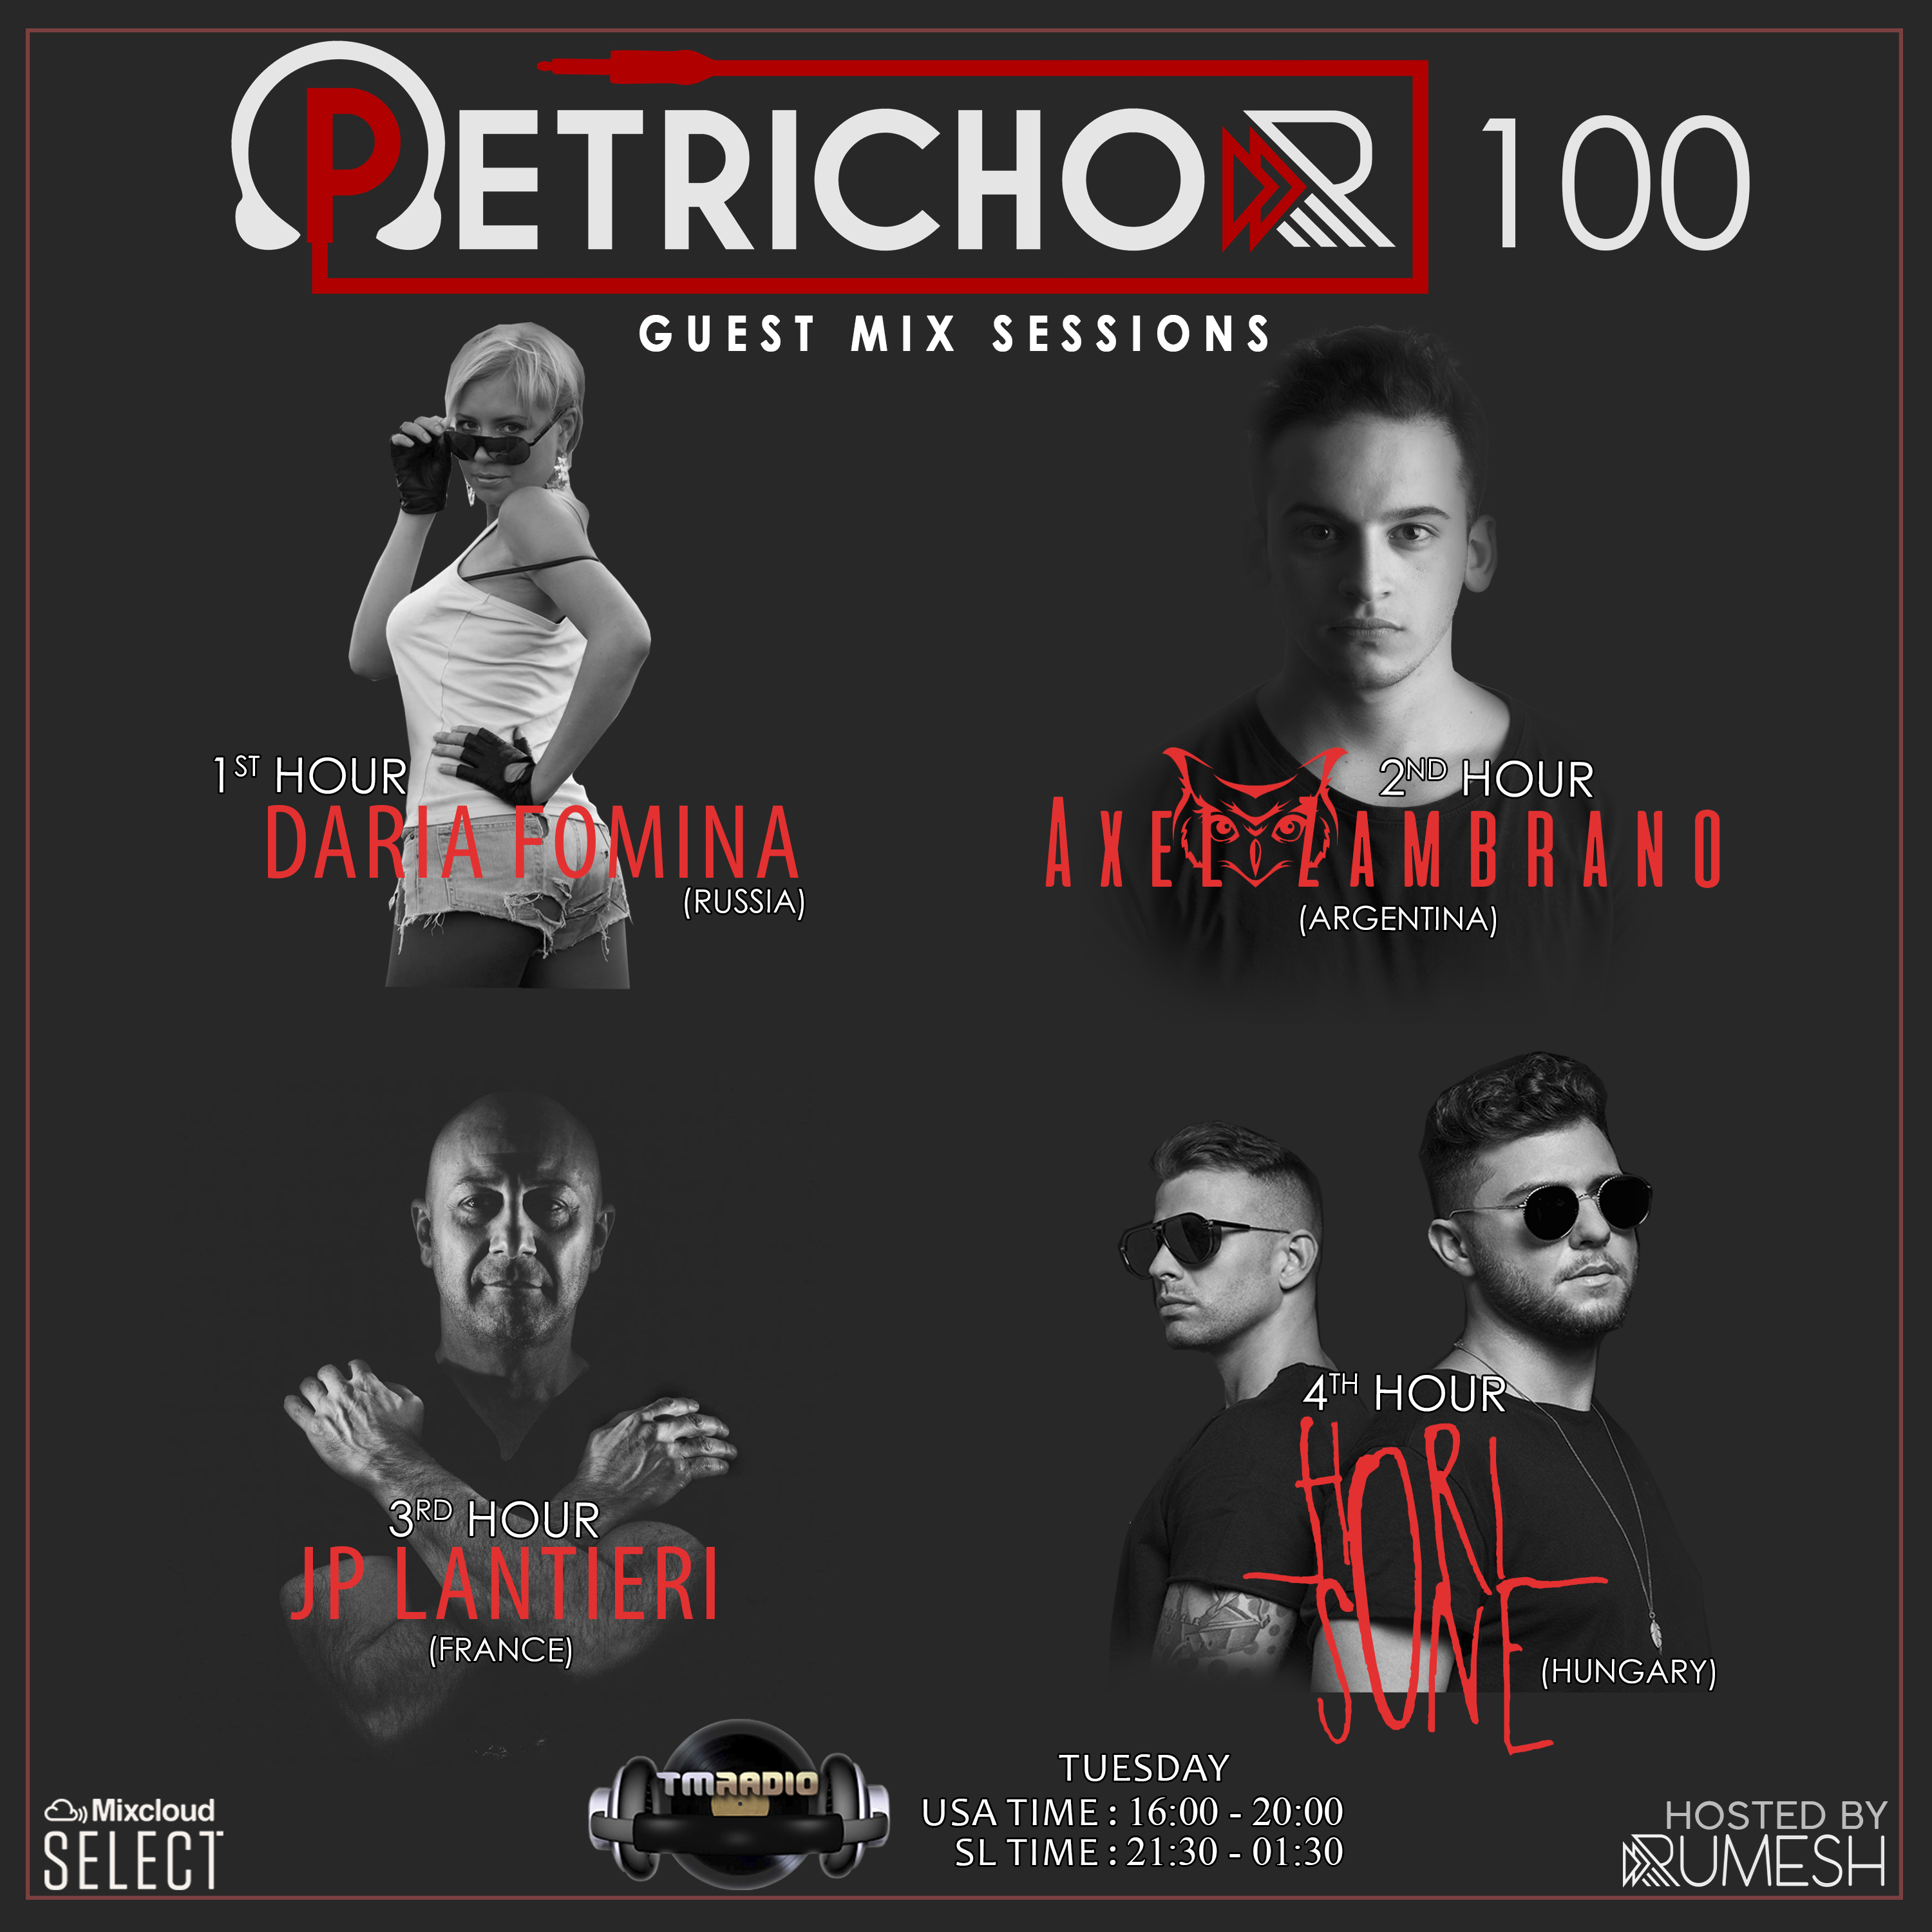 Petrichor :: Petrichor 100 Guest Mix Sessions by |Daria Fomina| |Axel Zambrano| |JP Lantieri| |Horisone| (aired on February 16th, 2021) banner logo